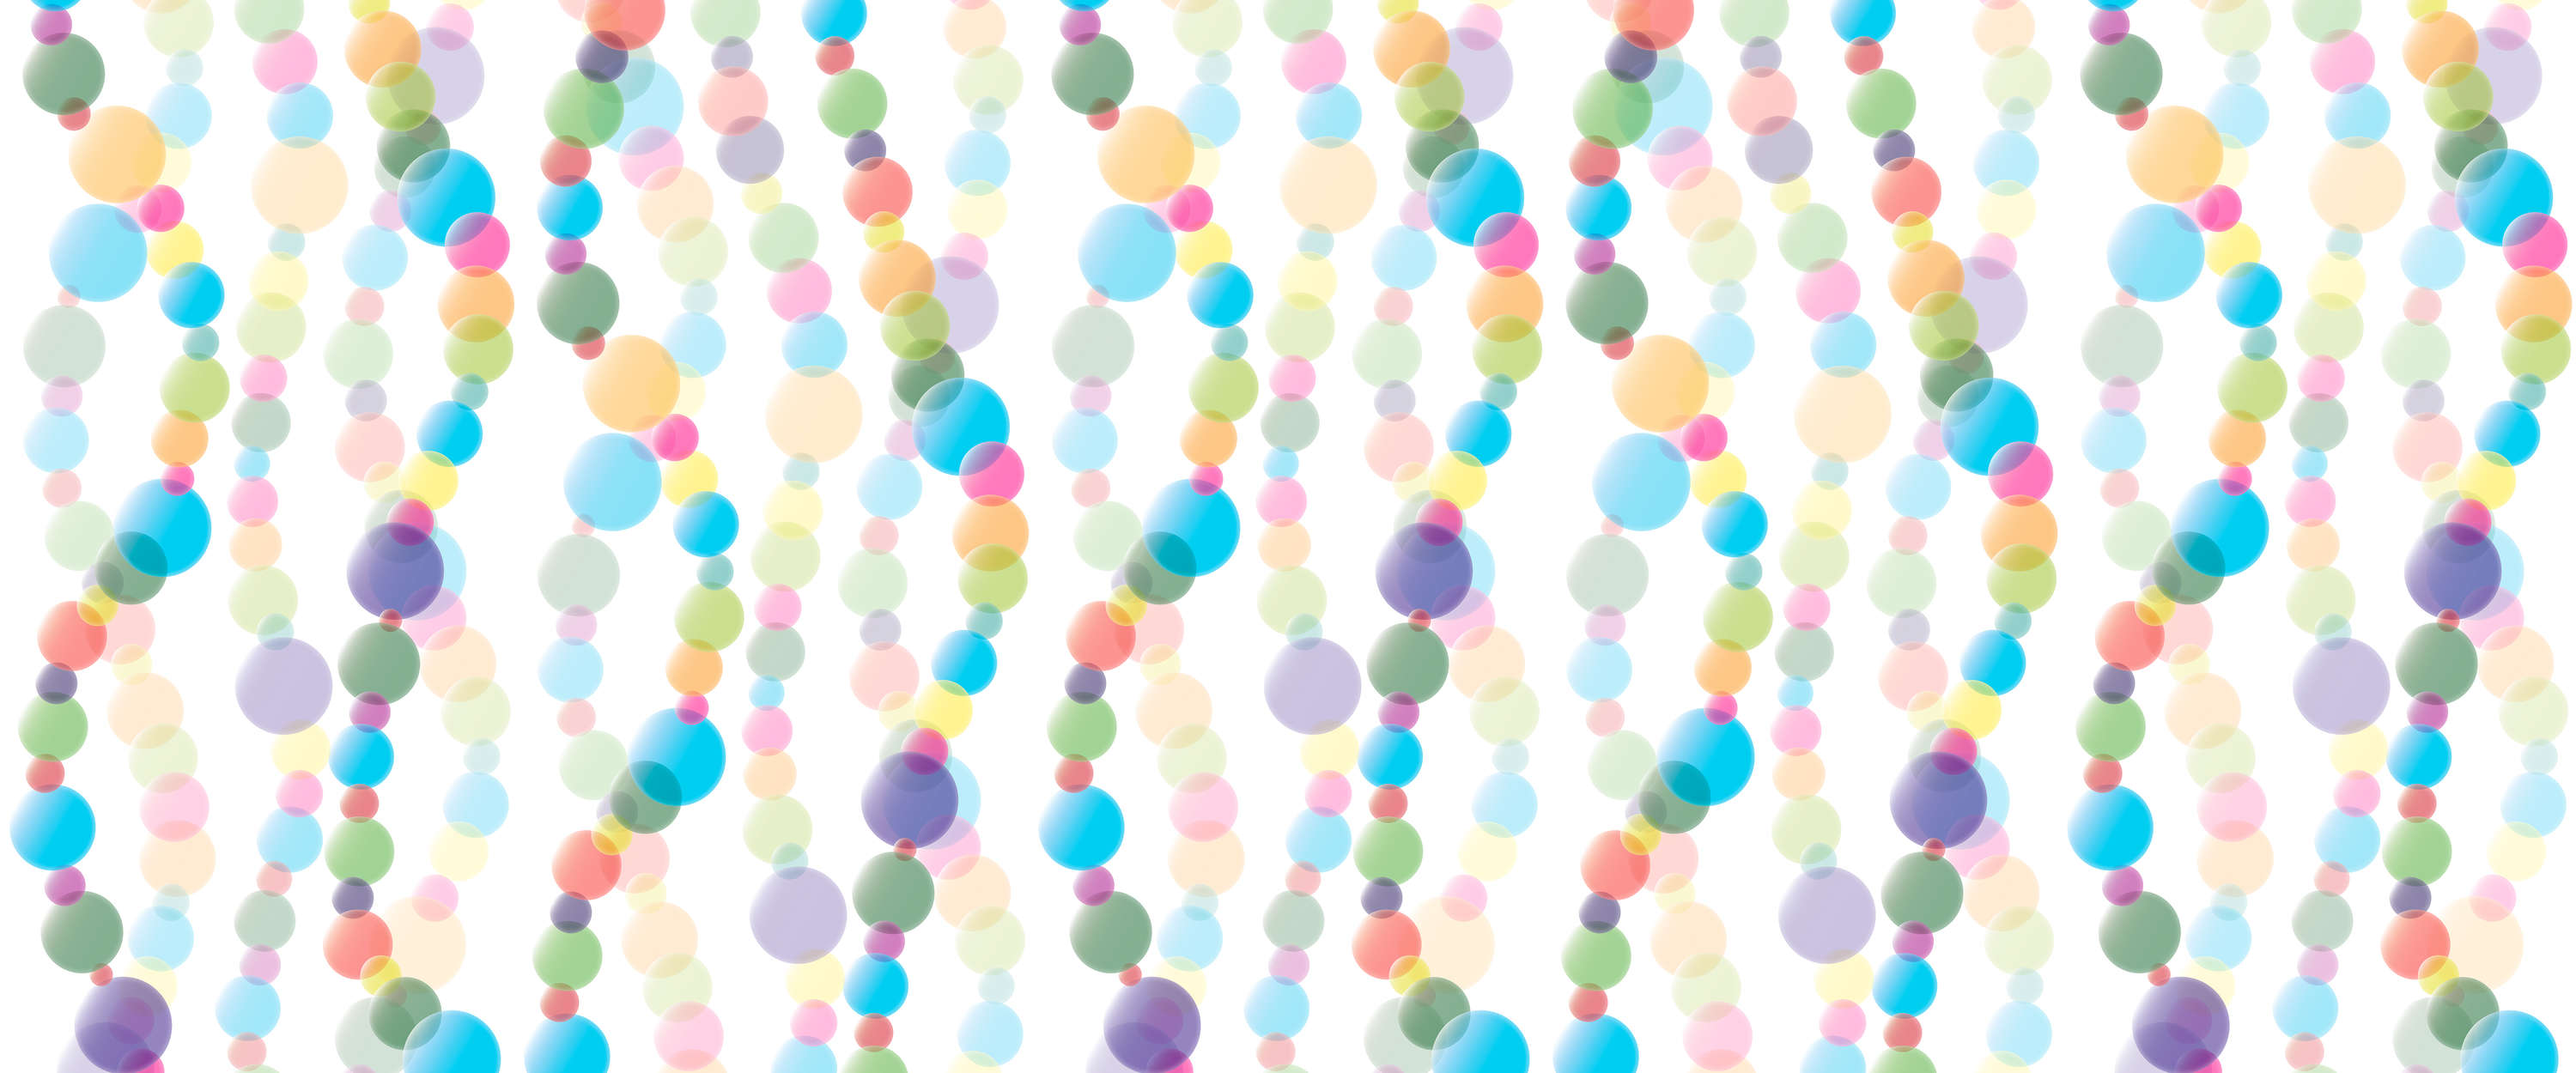             Colorful photo wallpaper dots chain in curved lines
        